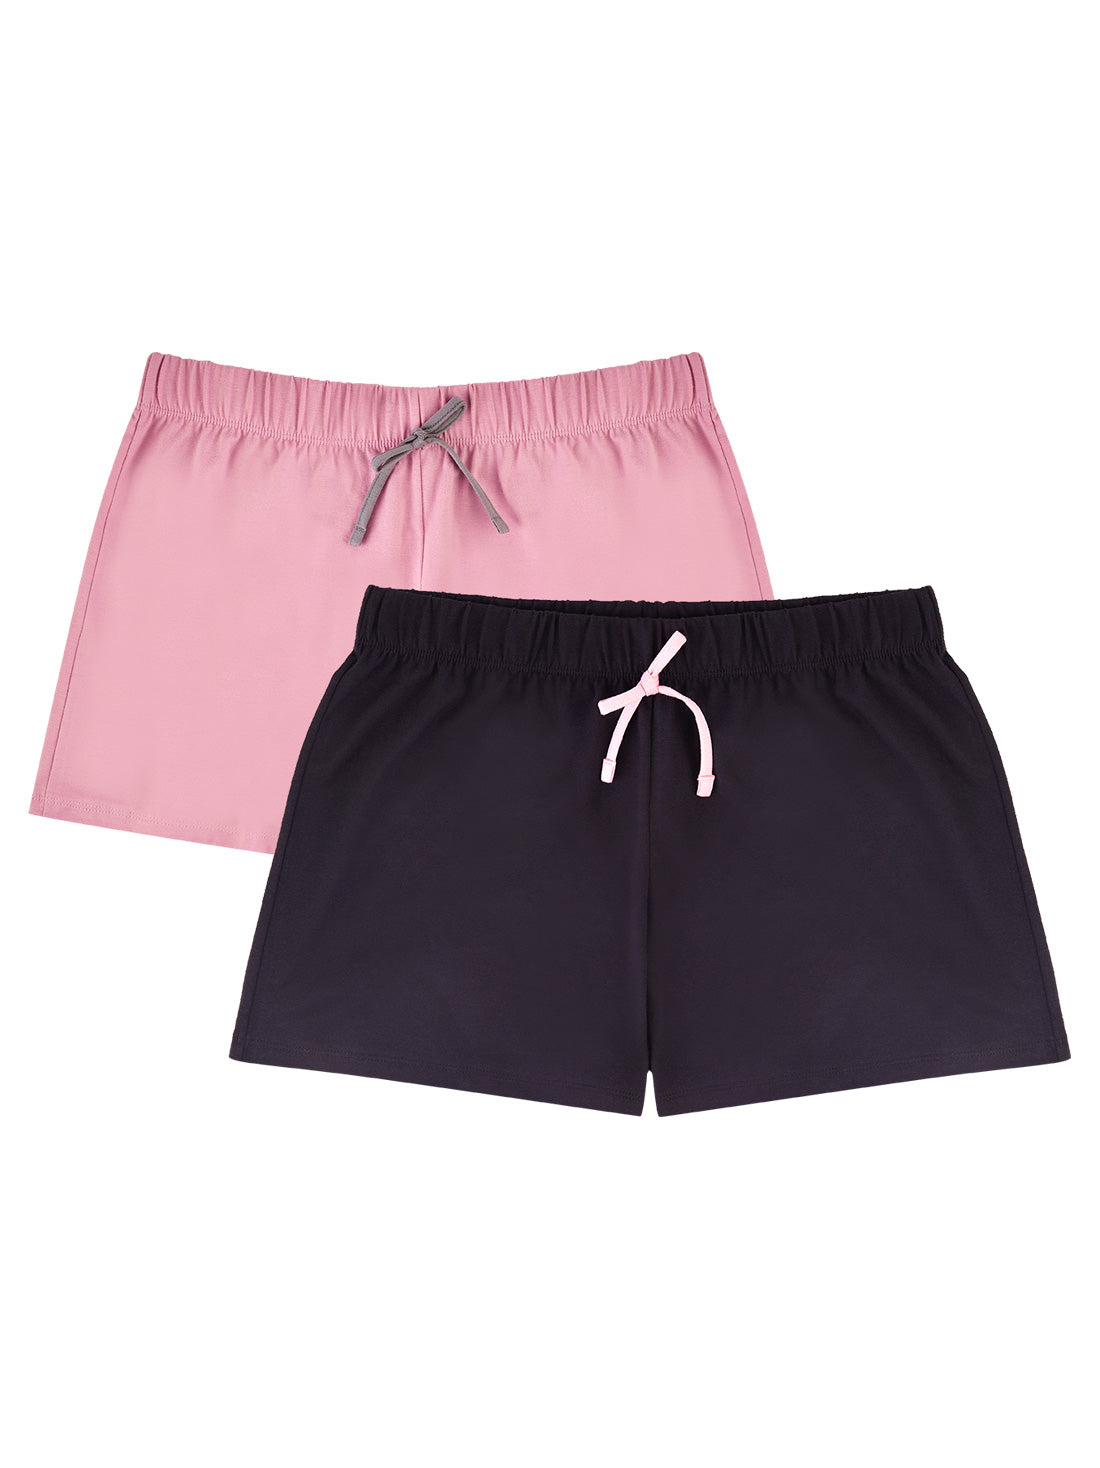 Two-Pack Shorts - 79019 - & Ilusion Stylish! Affordable 